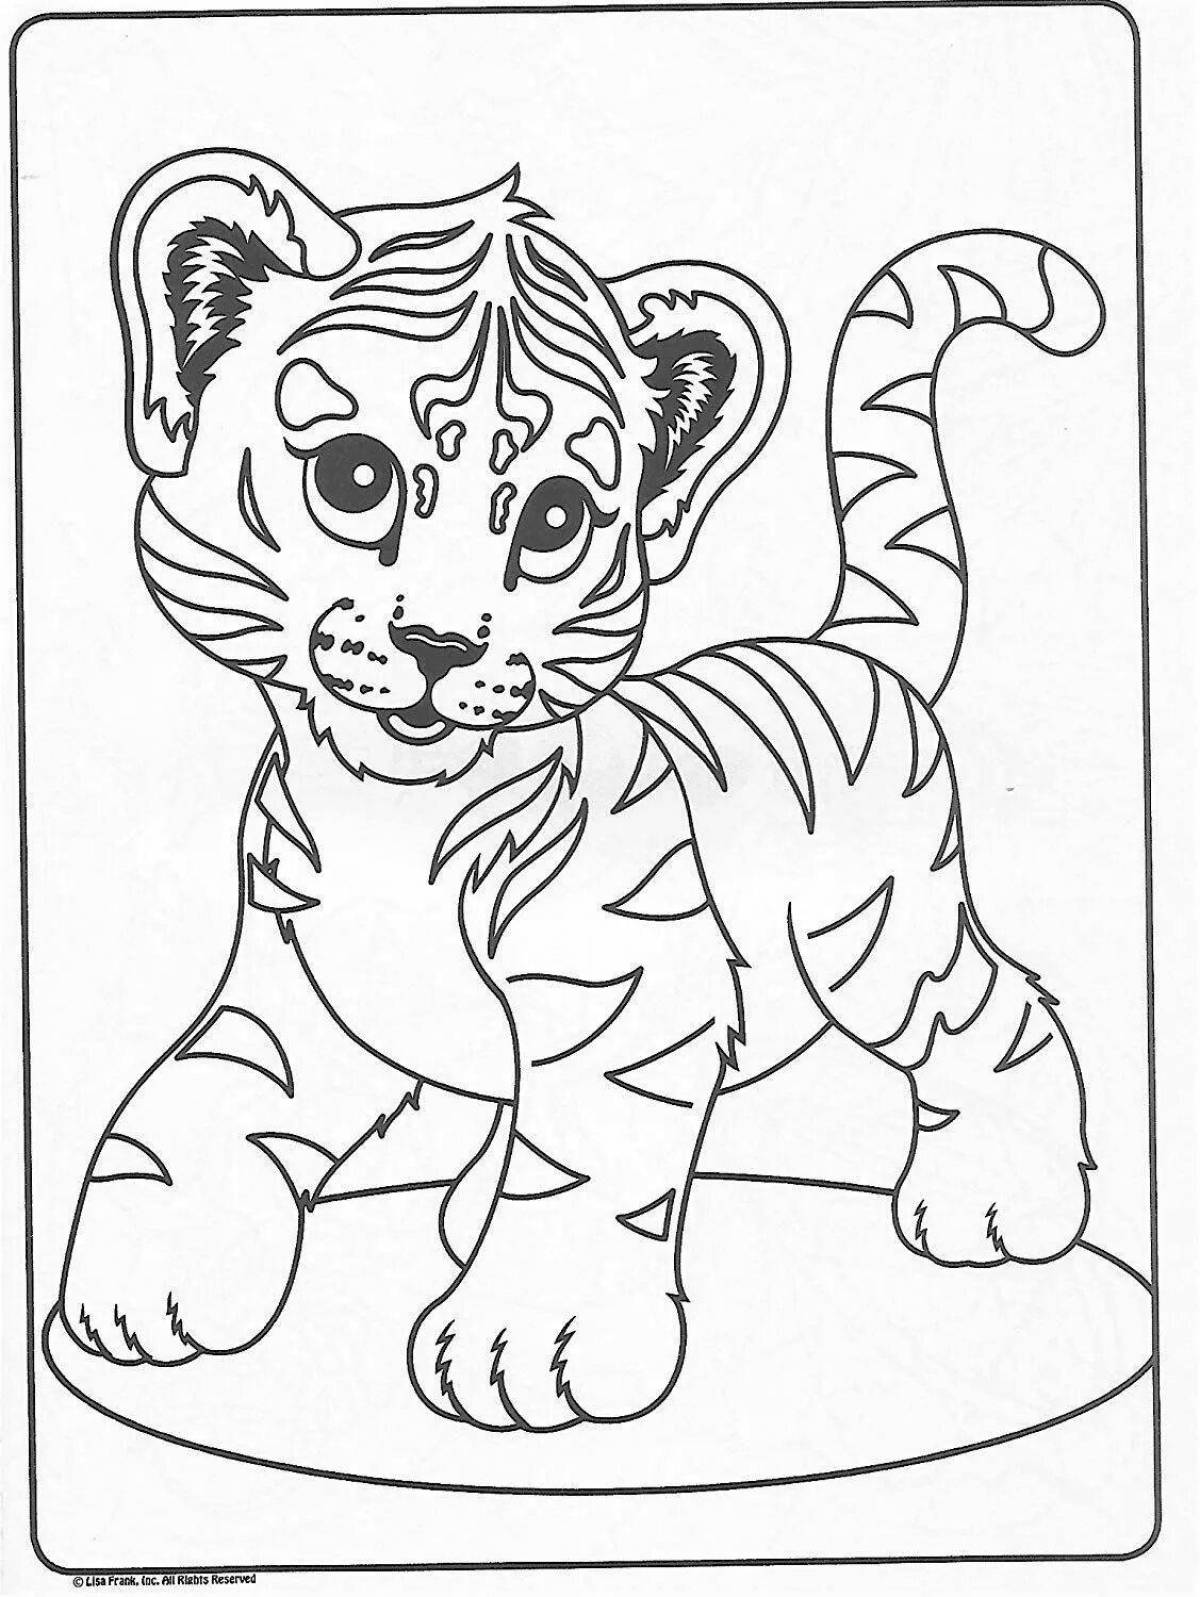 Creative tiger coloring book for 3-4 year olds